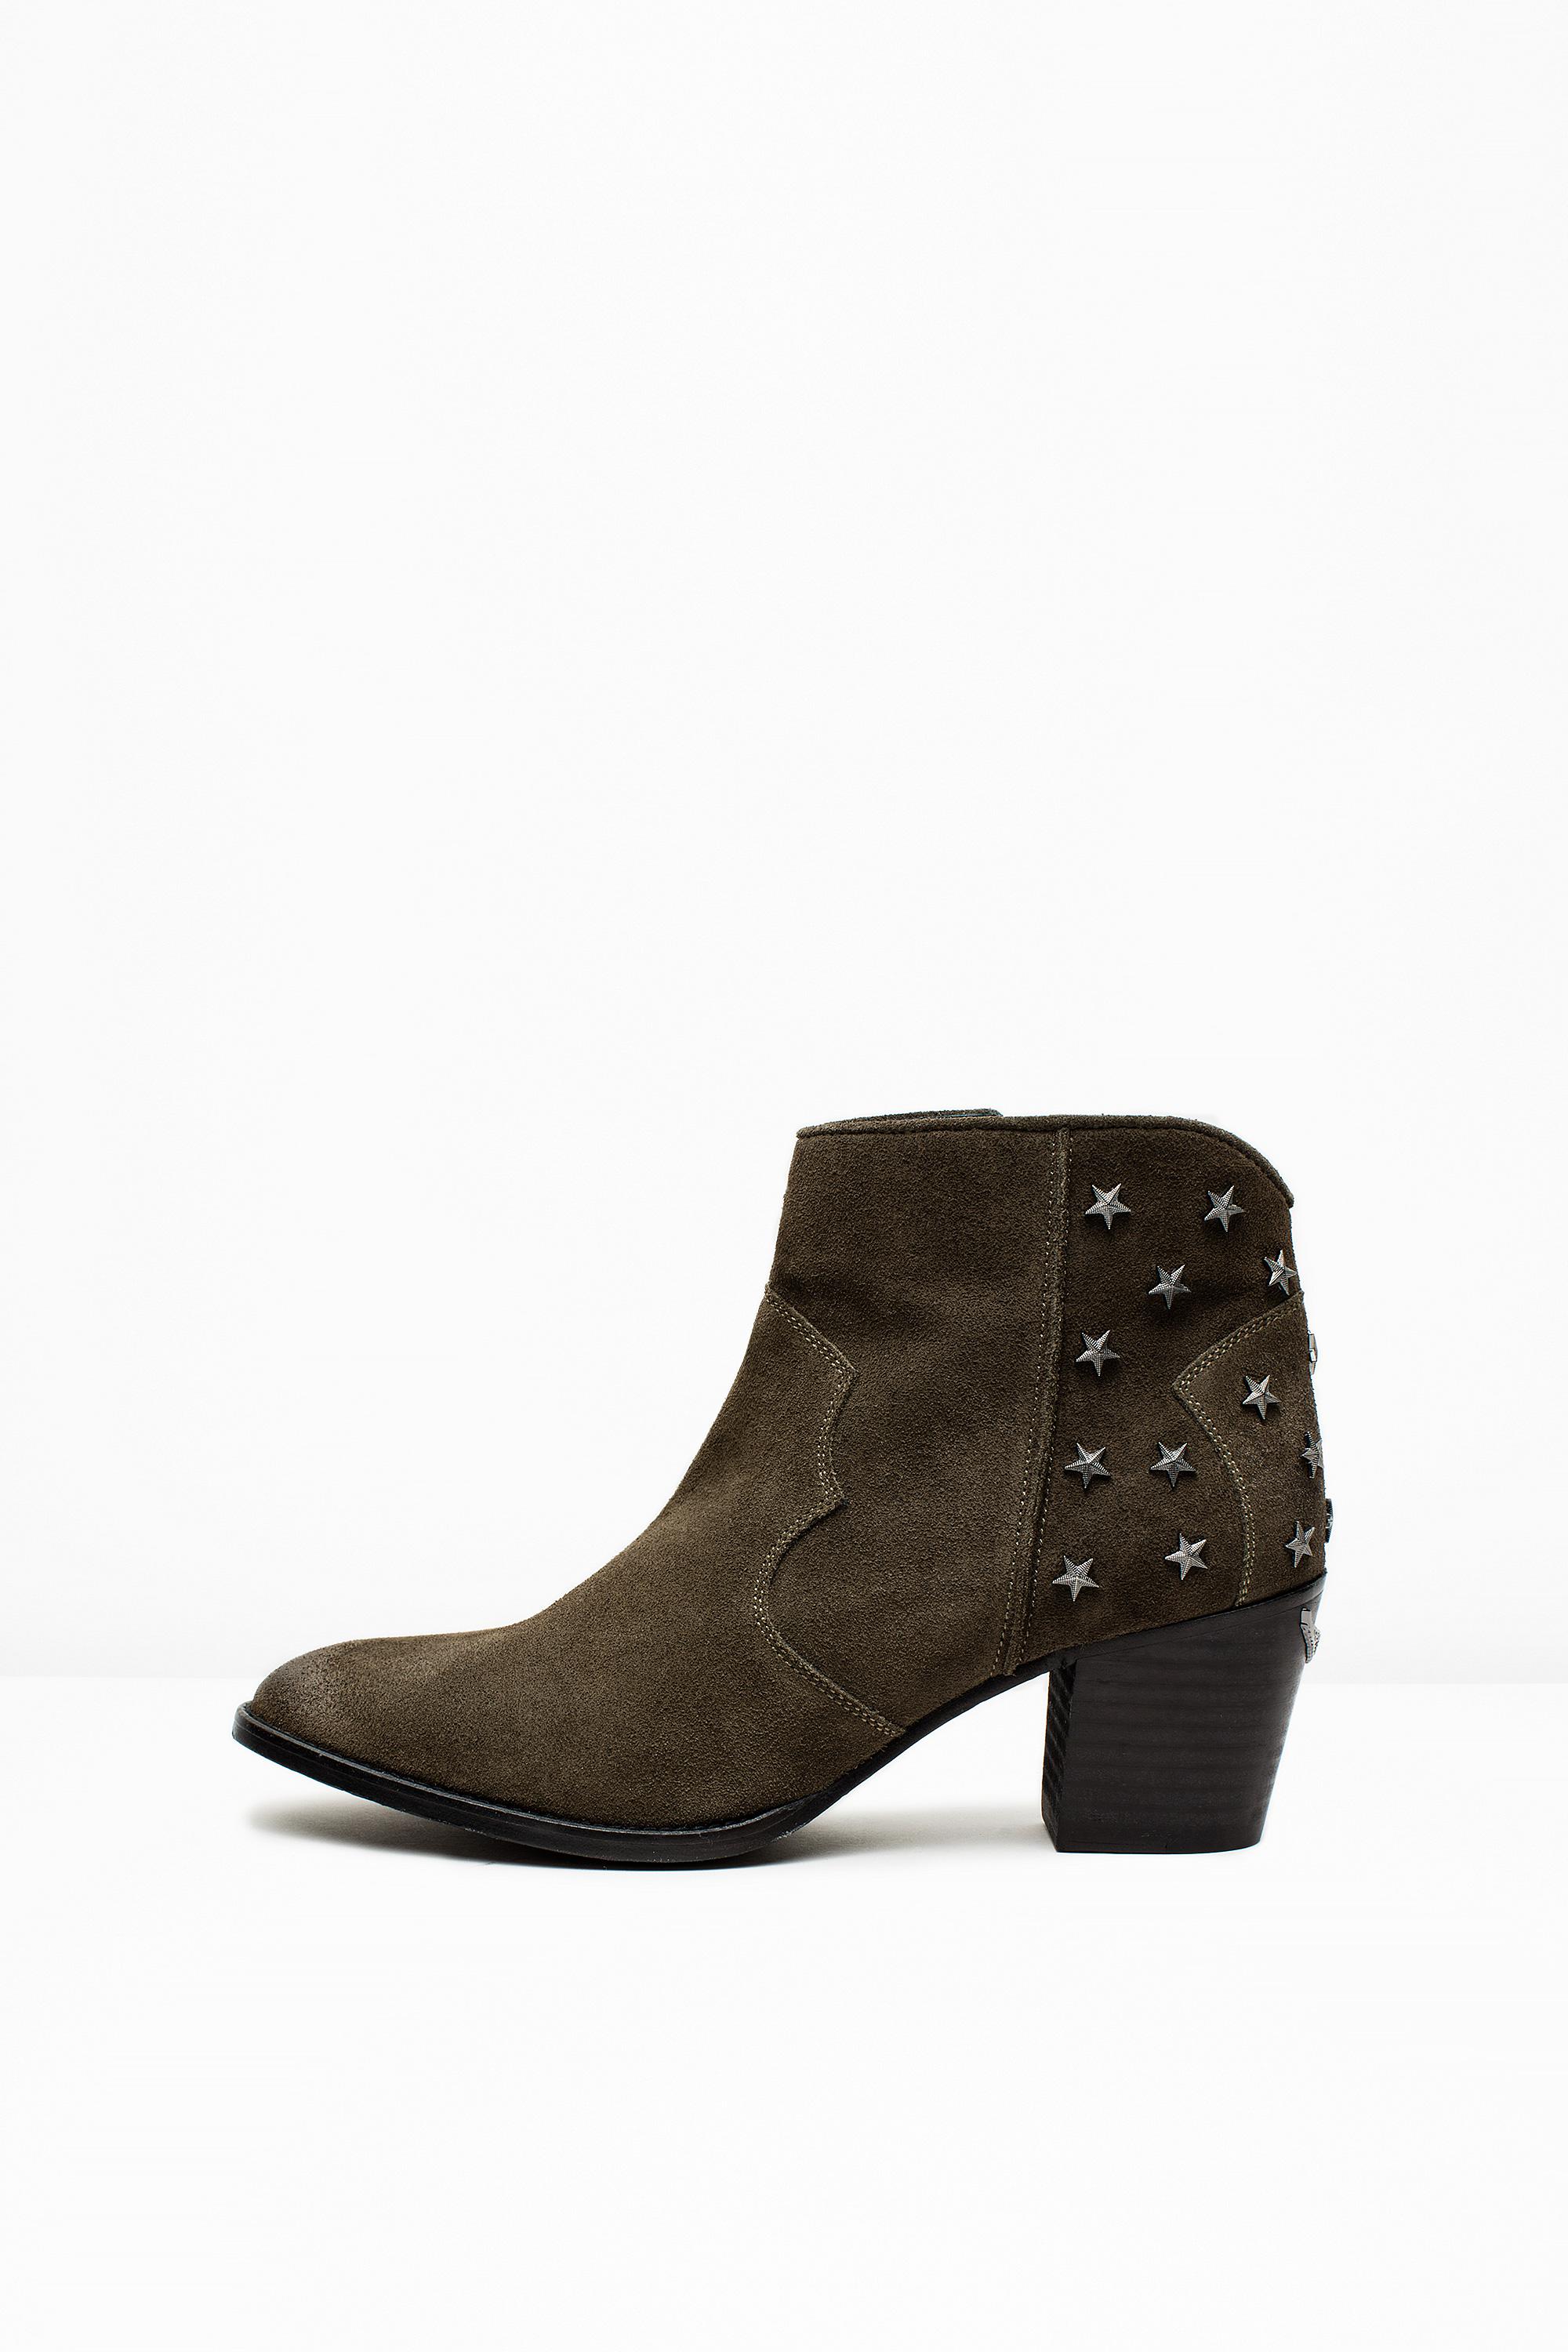 zadig voltaire molly boots